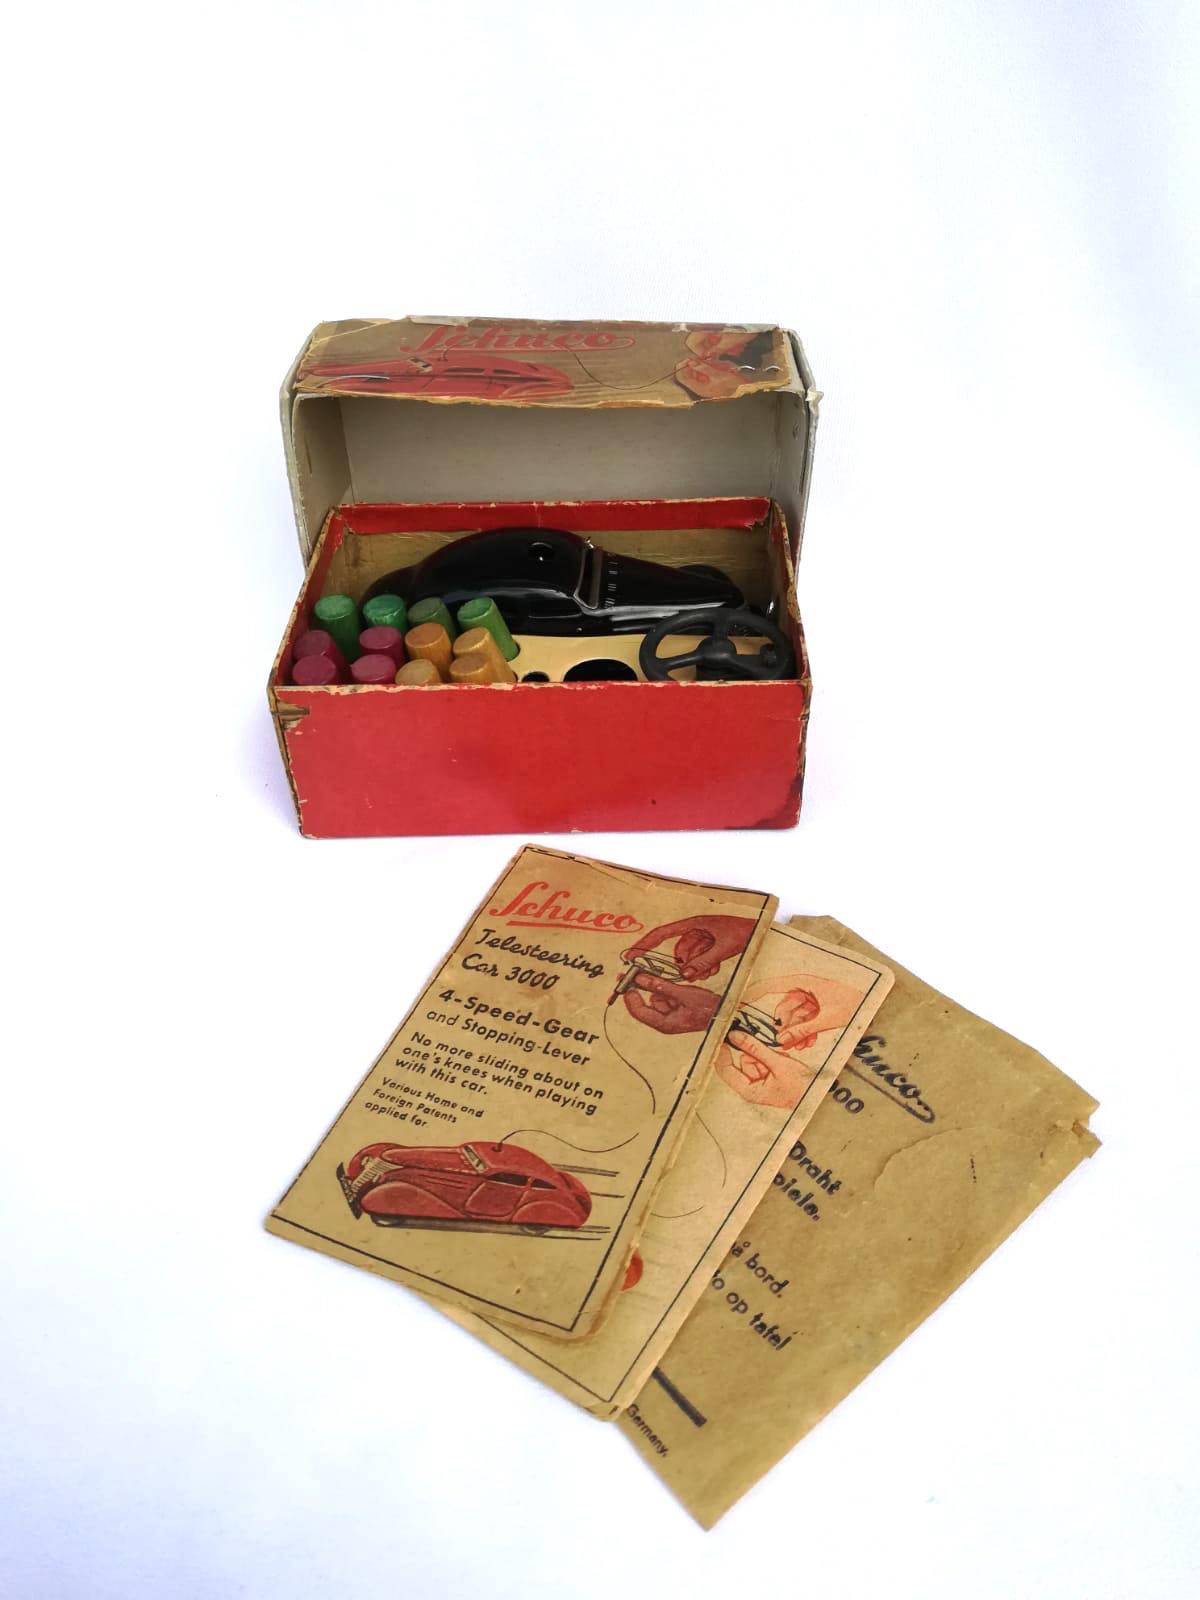 Beautiful black Schuco car 3000 with original box.
The box contain also:
- 4 red wood pins
- 4 yellow wood pins
- 4 green wood pins
- 1 key
- Instructions
Even if there are visible signs of wear due to time, the car is in very good condition.